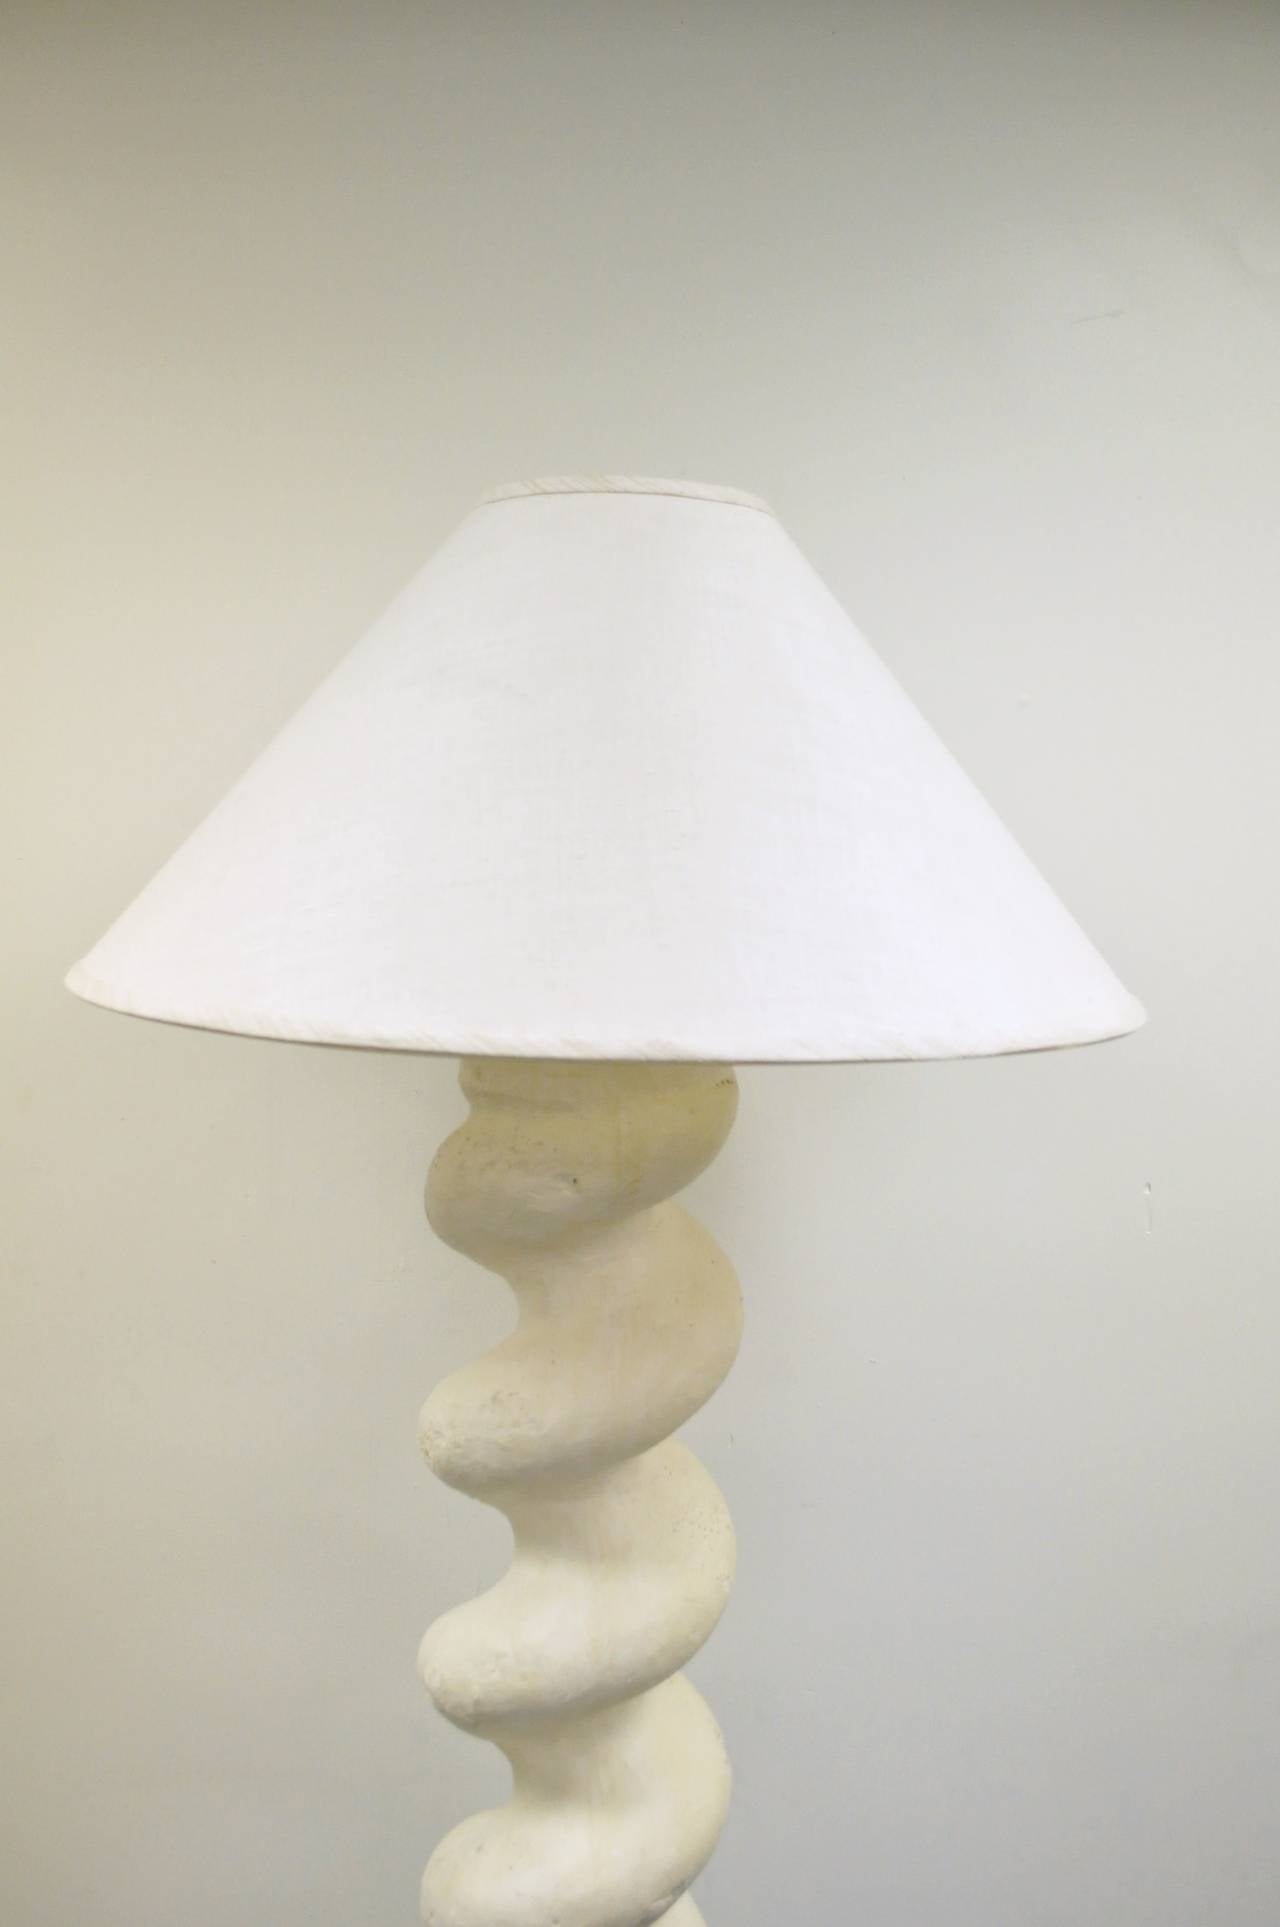 Remarkable and heavy solid plaster, spiral form floor lamp designed by Michael Taylor.